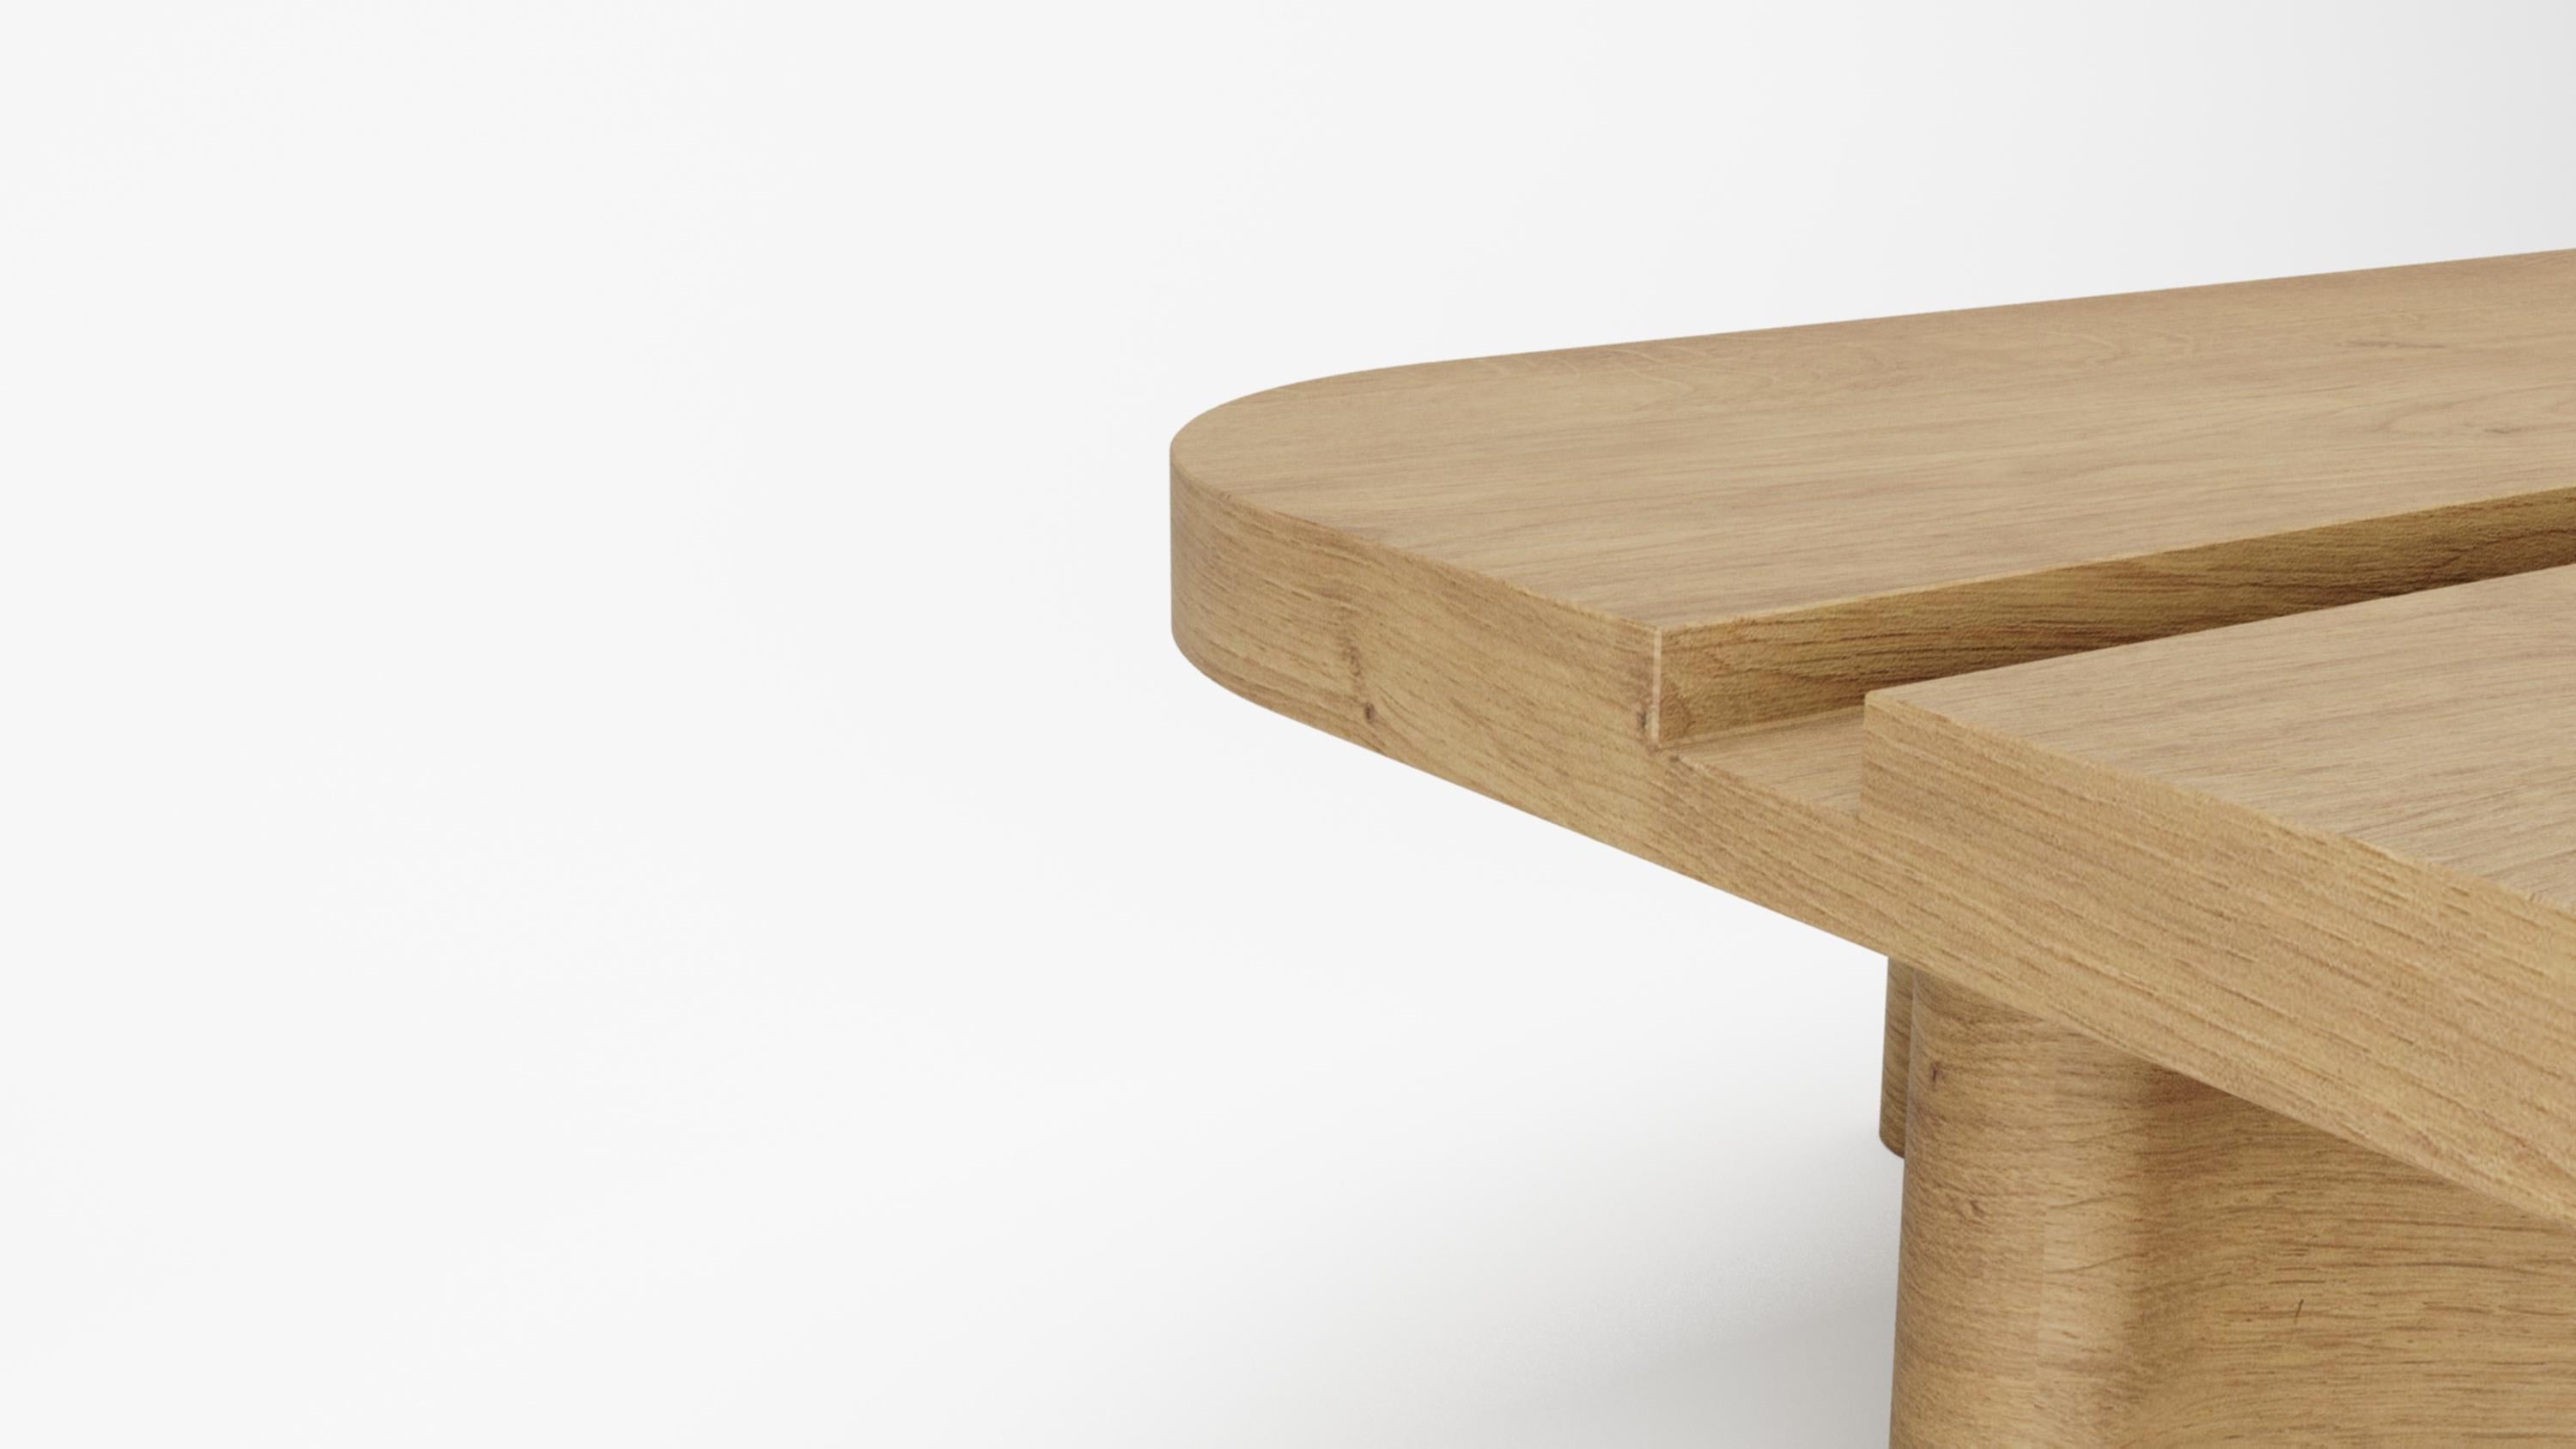 Collector - Designed by Studio Rig Riviera Center Table Smoked Oak

Collector brand was born and Portugal and aims to be part of daily life by fusing furniture to home routines and lifestyles. The company designs its pieces with the intention to